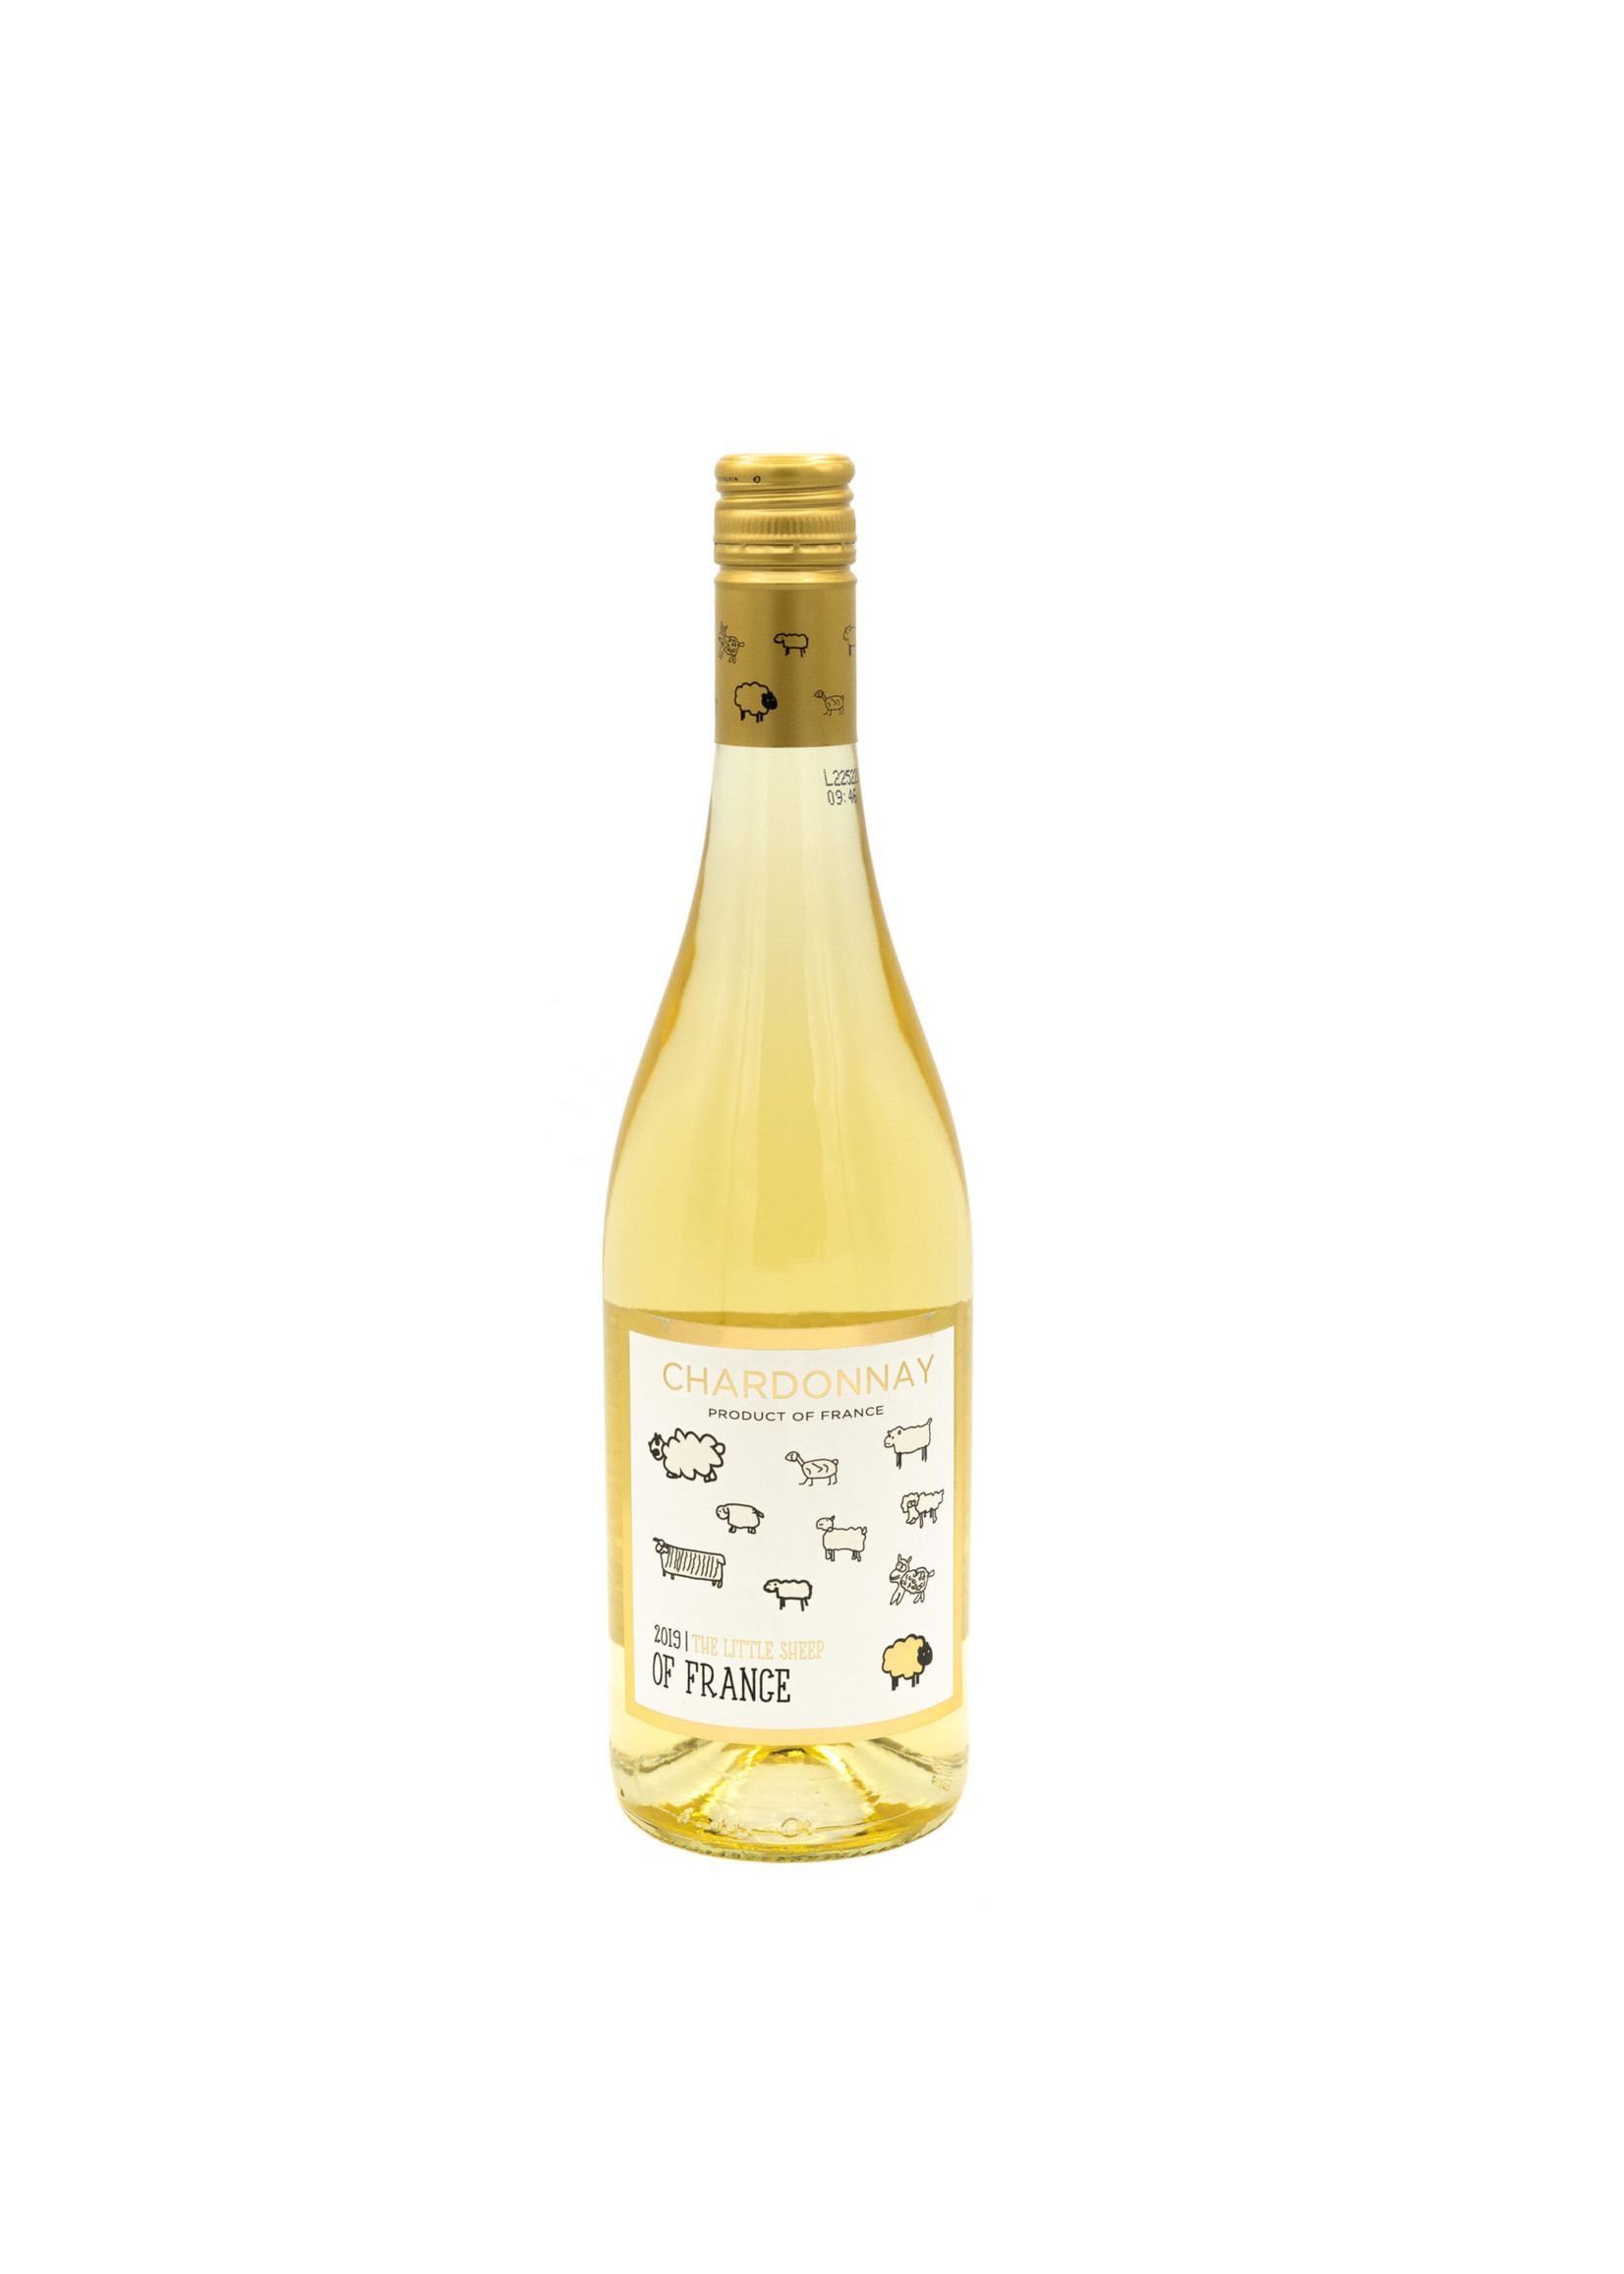 THE LITTLE SHEEP OF FRANCE THE LITTLE SHEEP OF FRANCE	CHARDONNAY	.750L